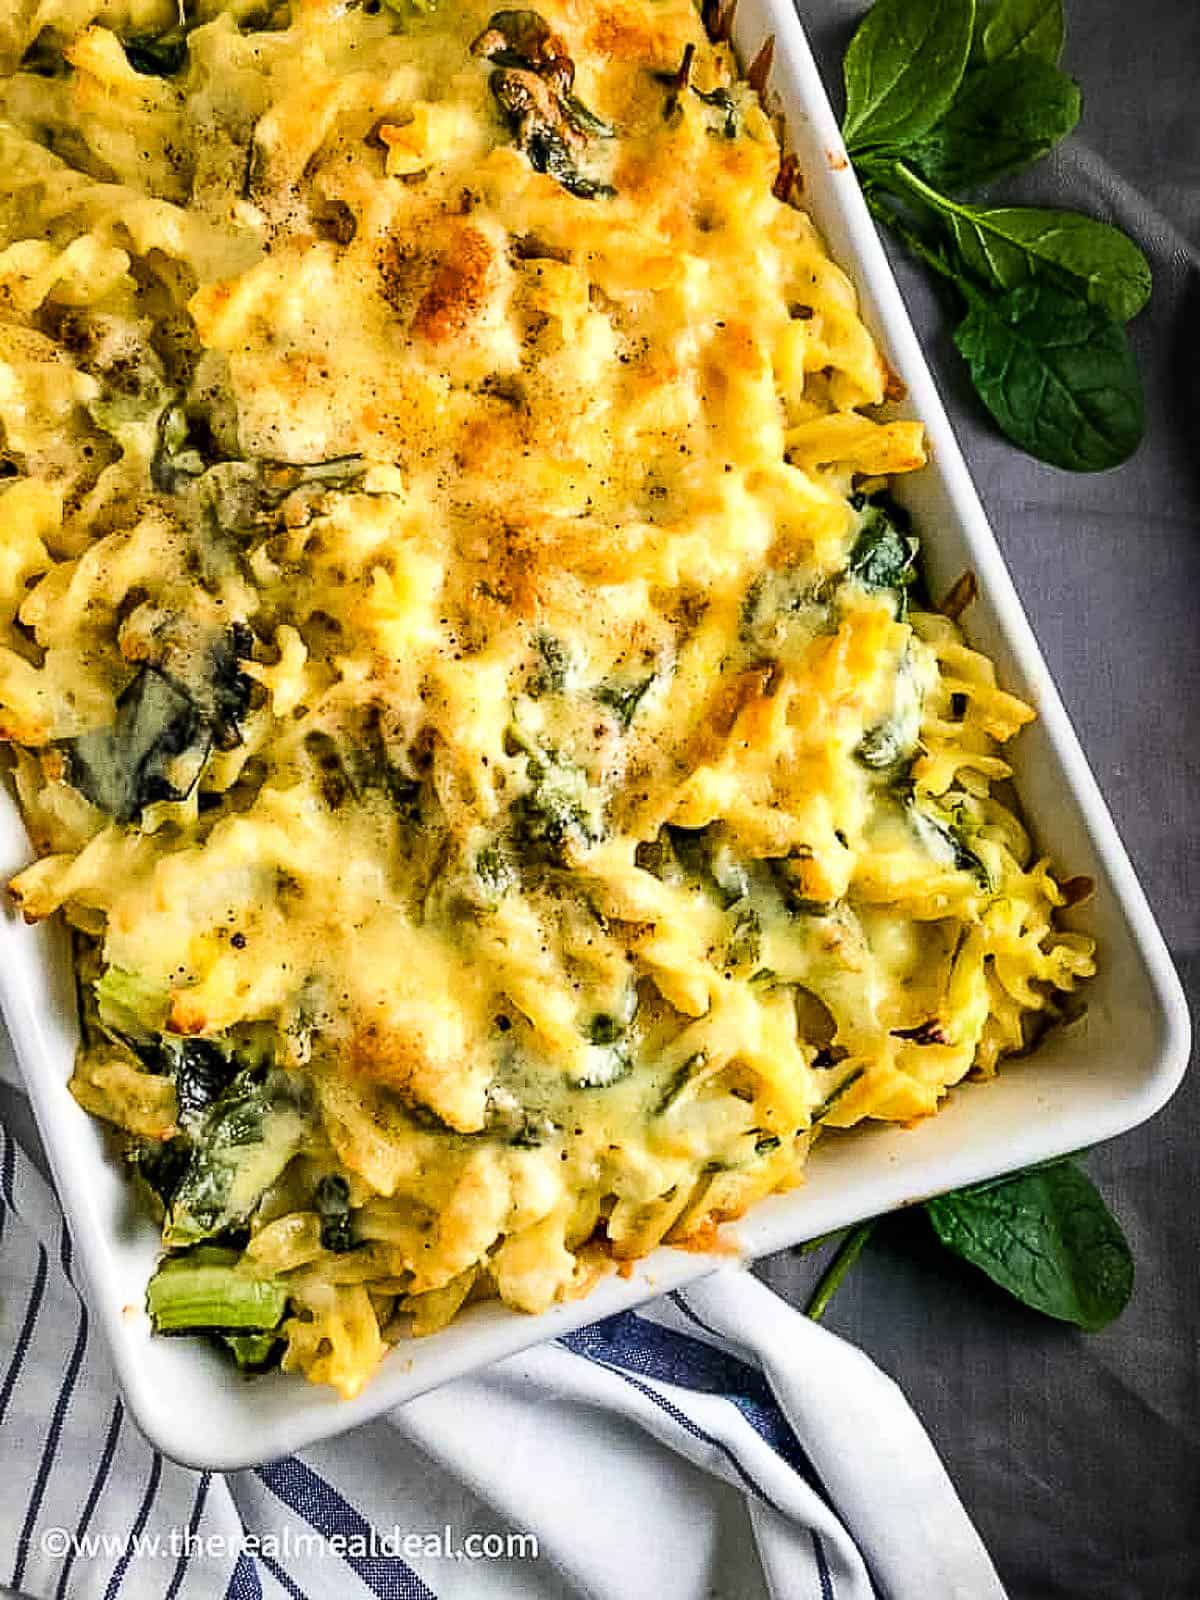 cauliflower cheese pasta bake with spinach in tray